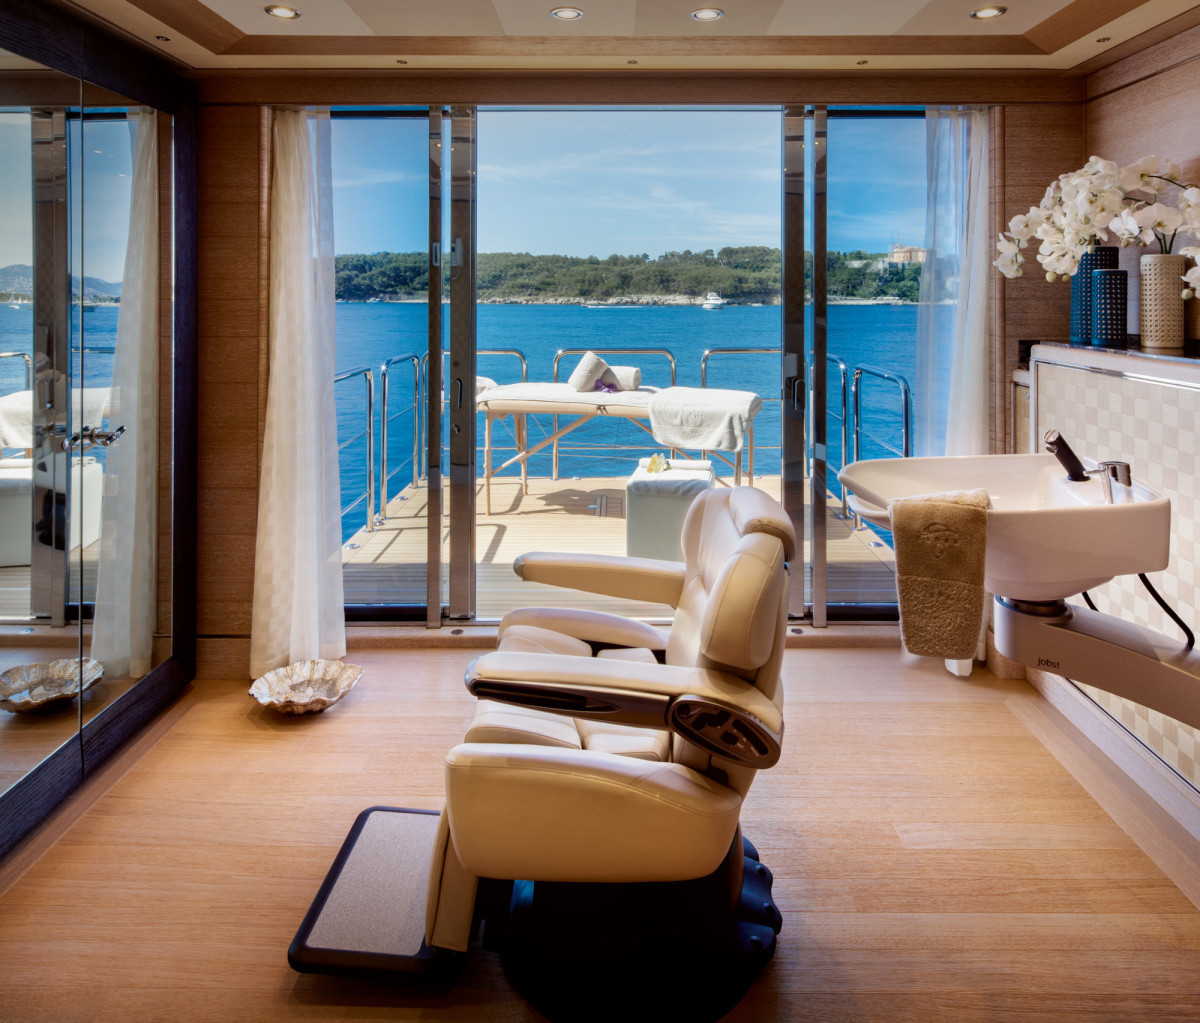 12 Fabulous Hardwood Flooring Under $3.00 2024 free download hardwood flooring under 3 00 of superyacht review an inside look at the crn motoryacht cloud 9 with regard to the beauty salon on the main deck has a balcony for alfresco massages